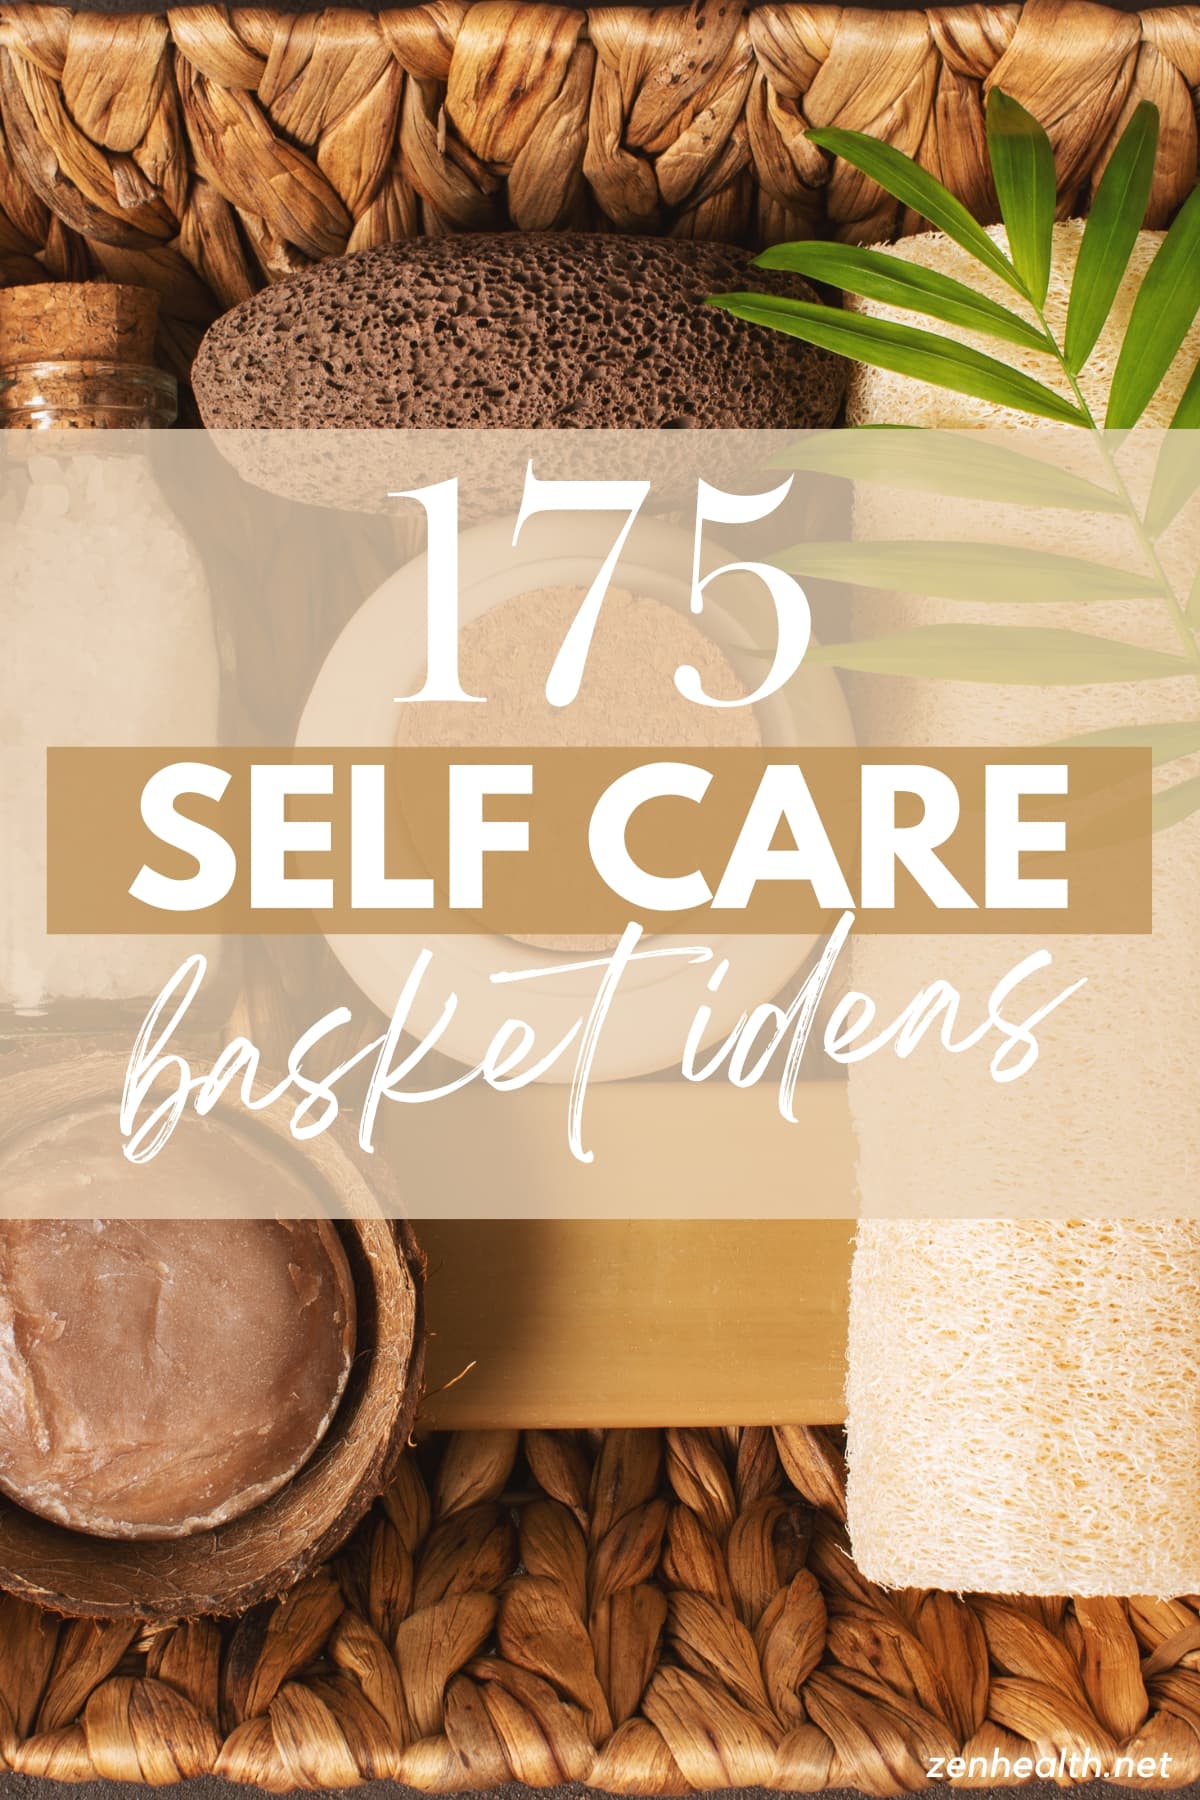 175 self care basket ideas text overlay on image of a basket with soap, loofah, bottles of salts and other self care items